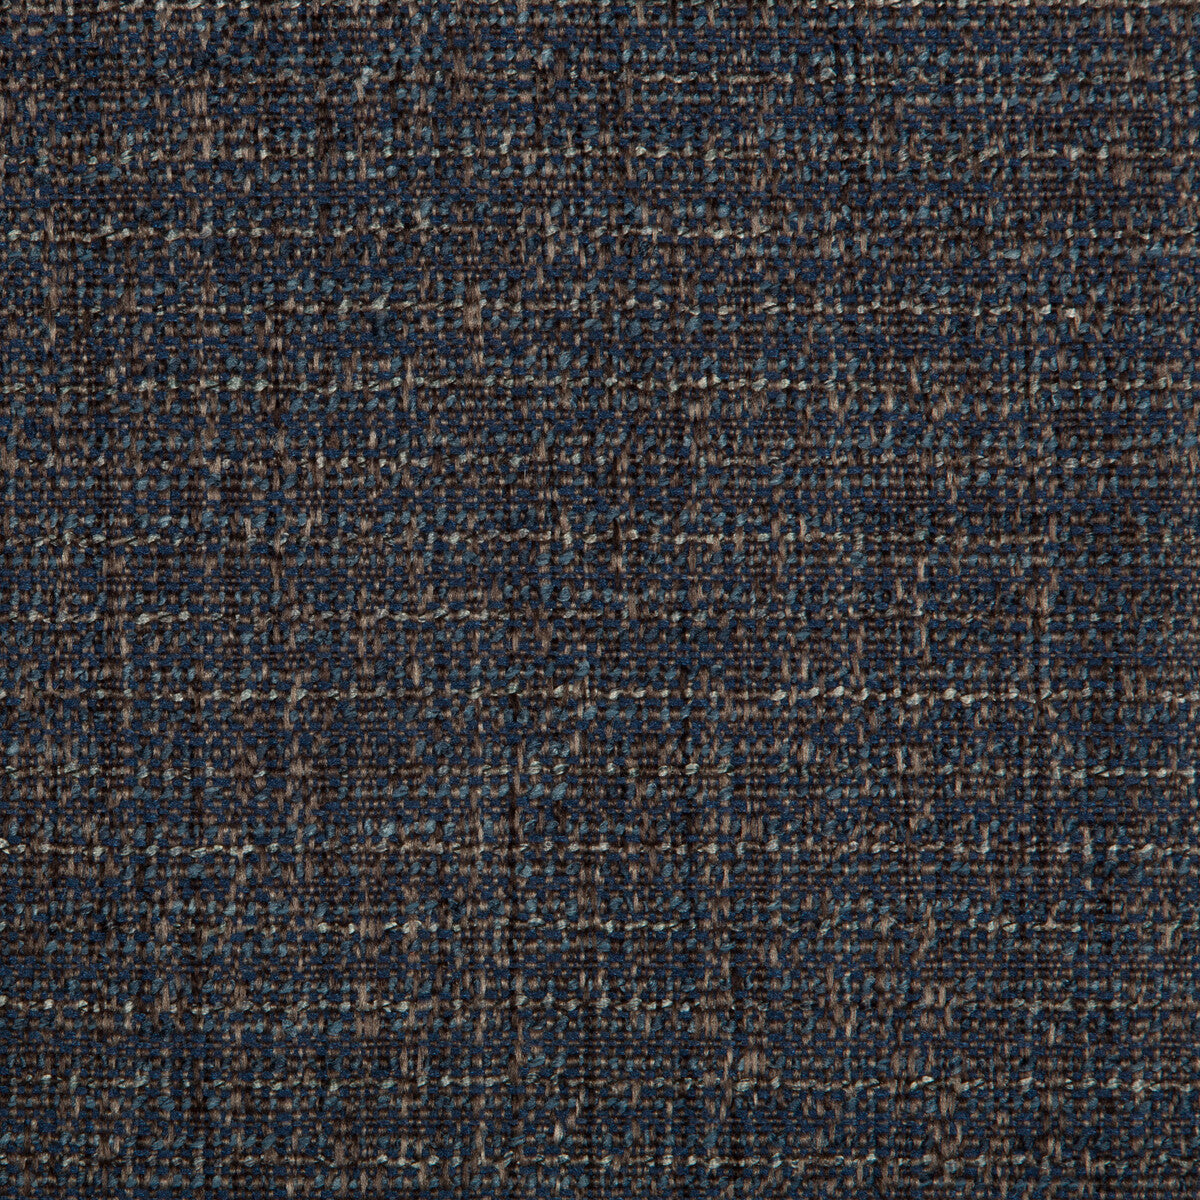 Kravet Smart fabric in 35396-50 color - pattern 35396.50.0 - by Kravet Smart in the Performance Crypton Home collection